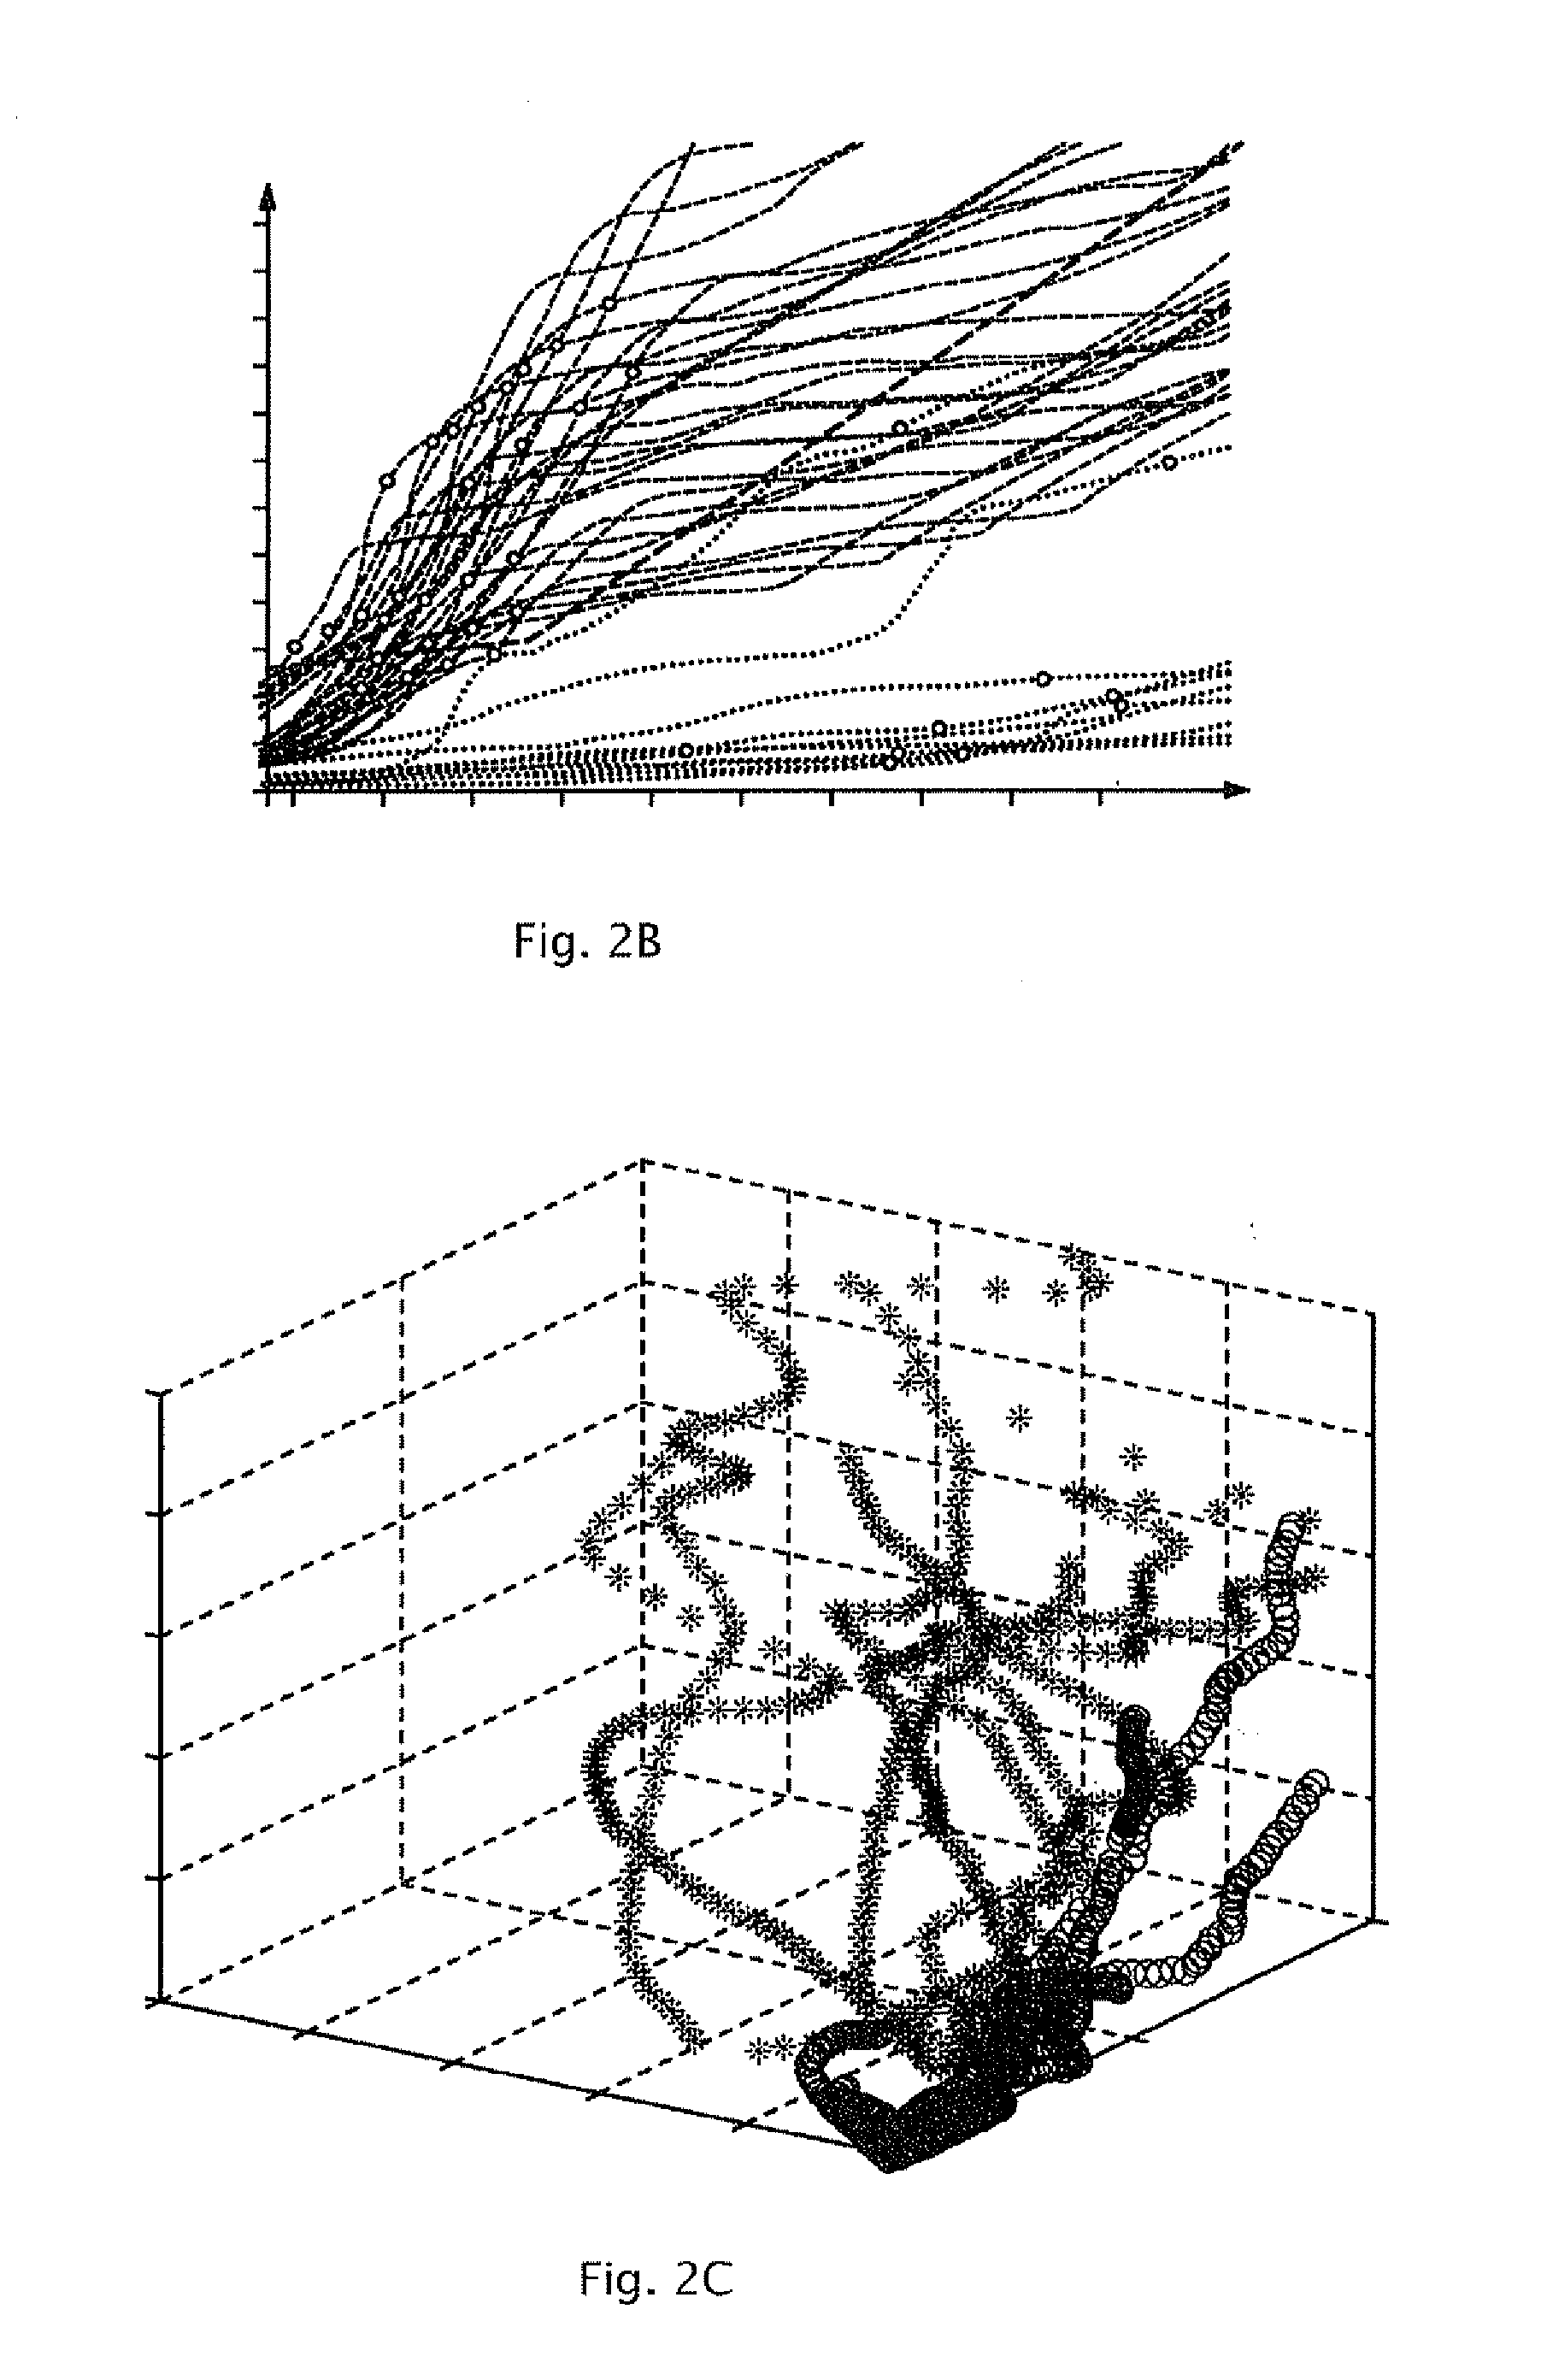 Method and control unit for detecting a safety-critical impact of an object on a vehicle